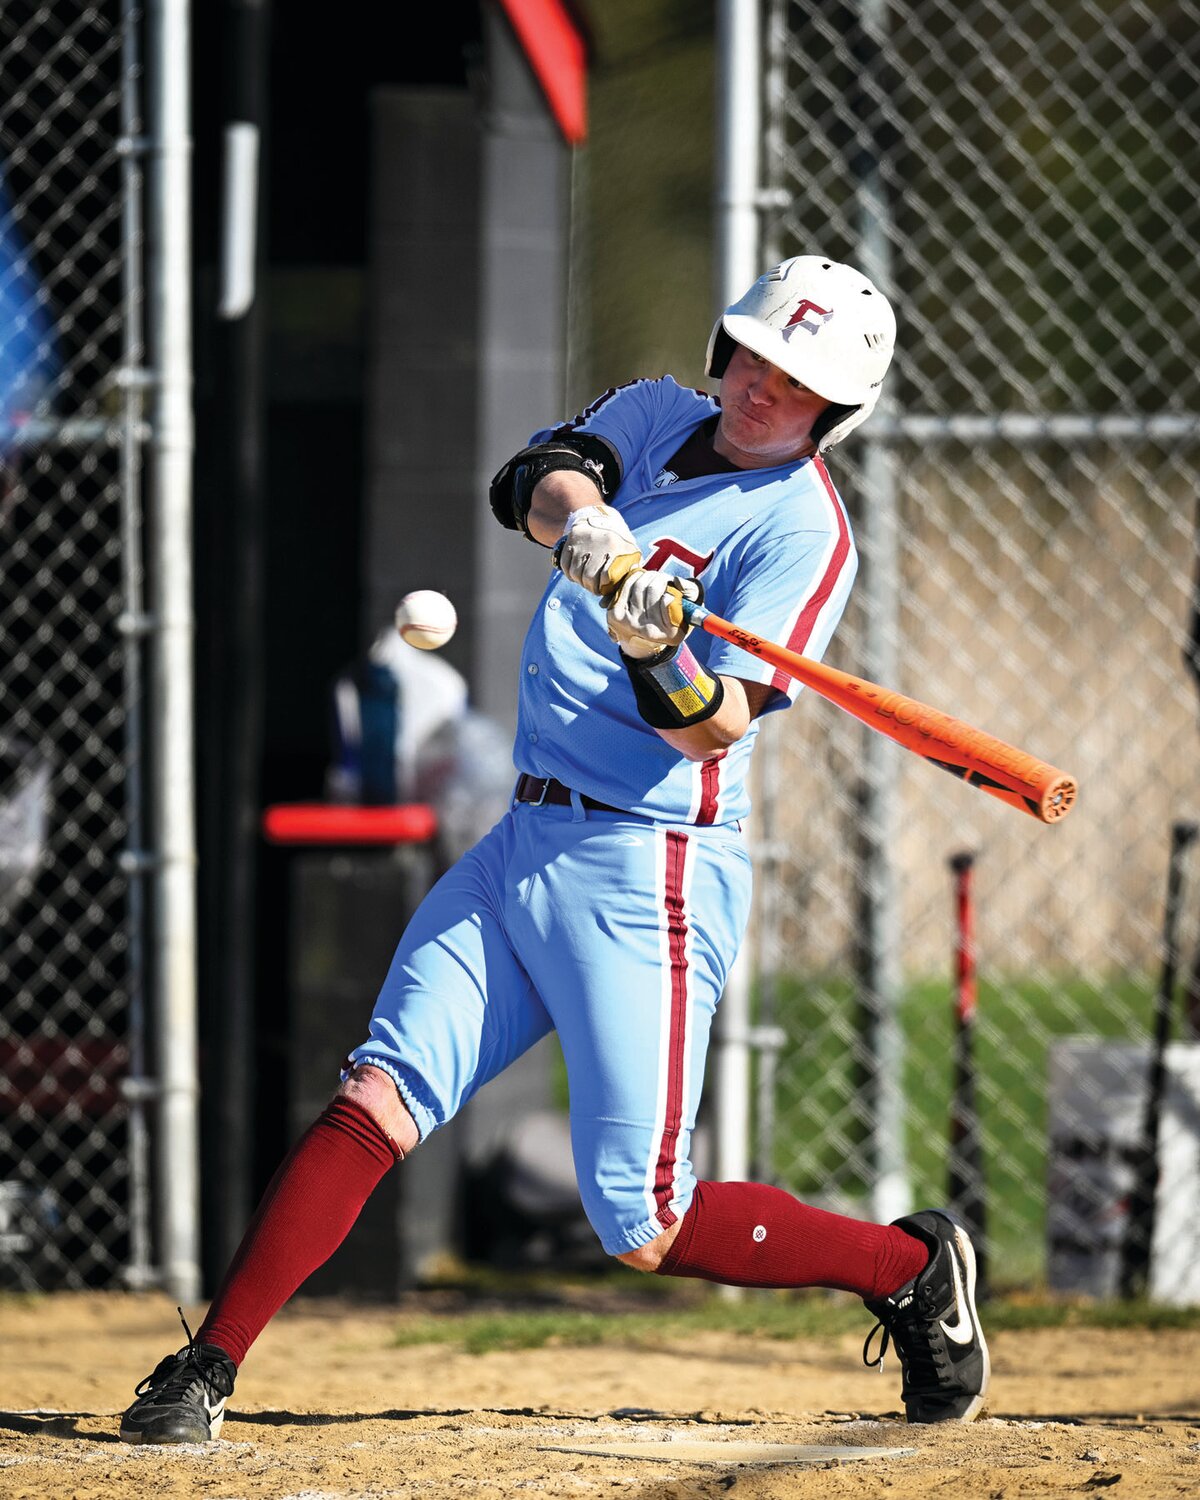 Faith Christian’s Grayson Weikel connects in the sixth inning for a two-run home run for a 3-0 lead.